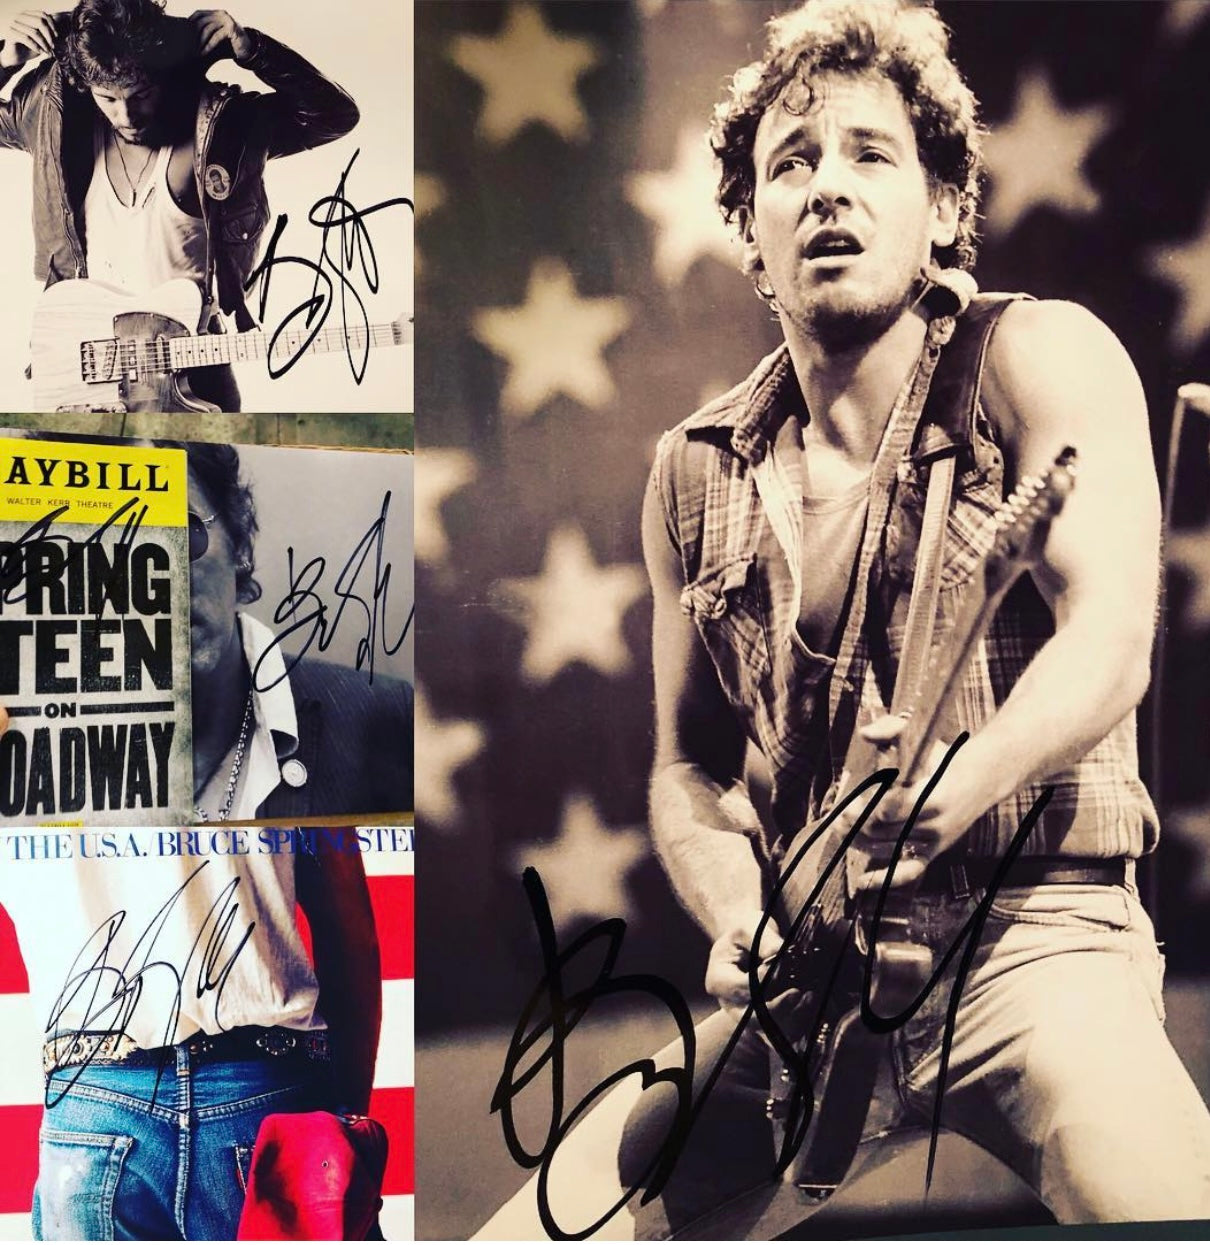 Load video: Getting in person autographs from Bruce Springsteen on Broadway!!! NYC.